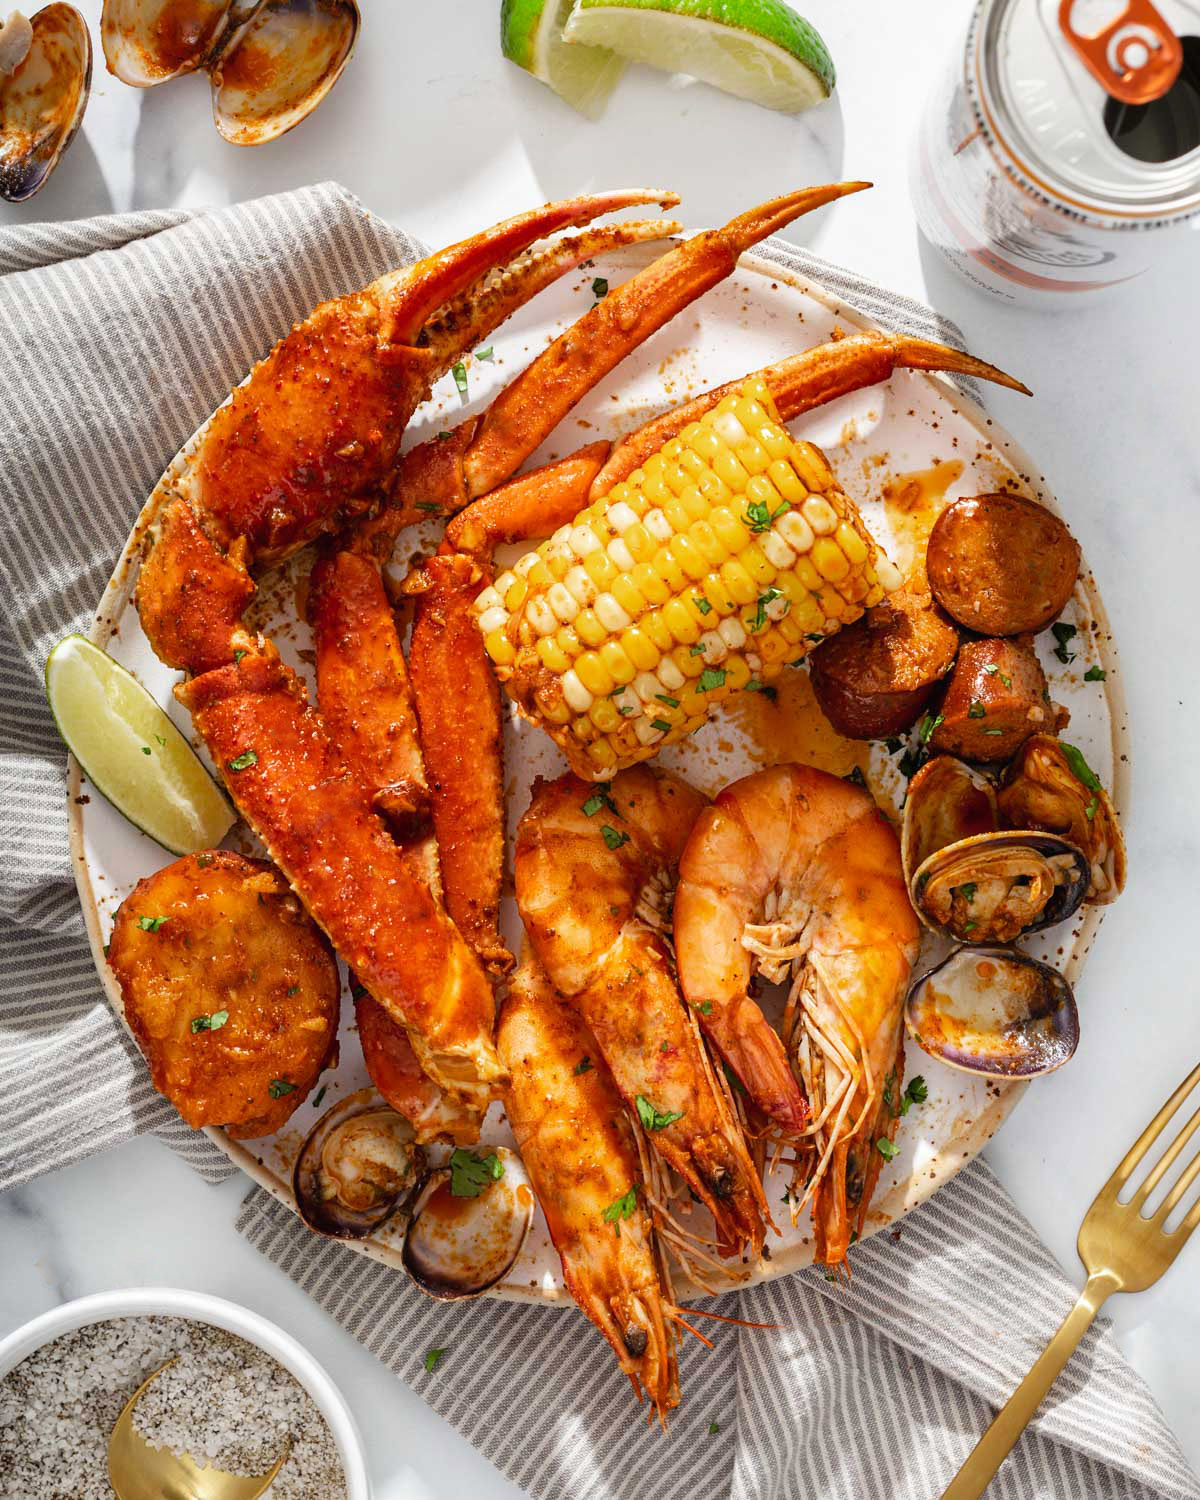 A plate of various boiled cajun seafood